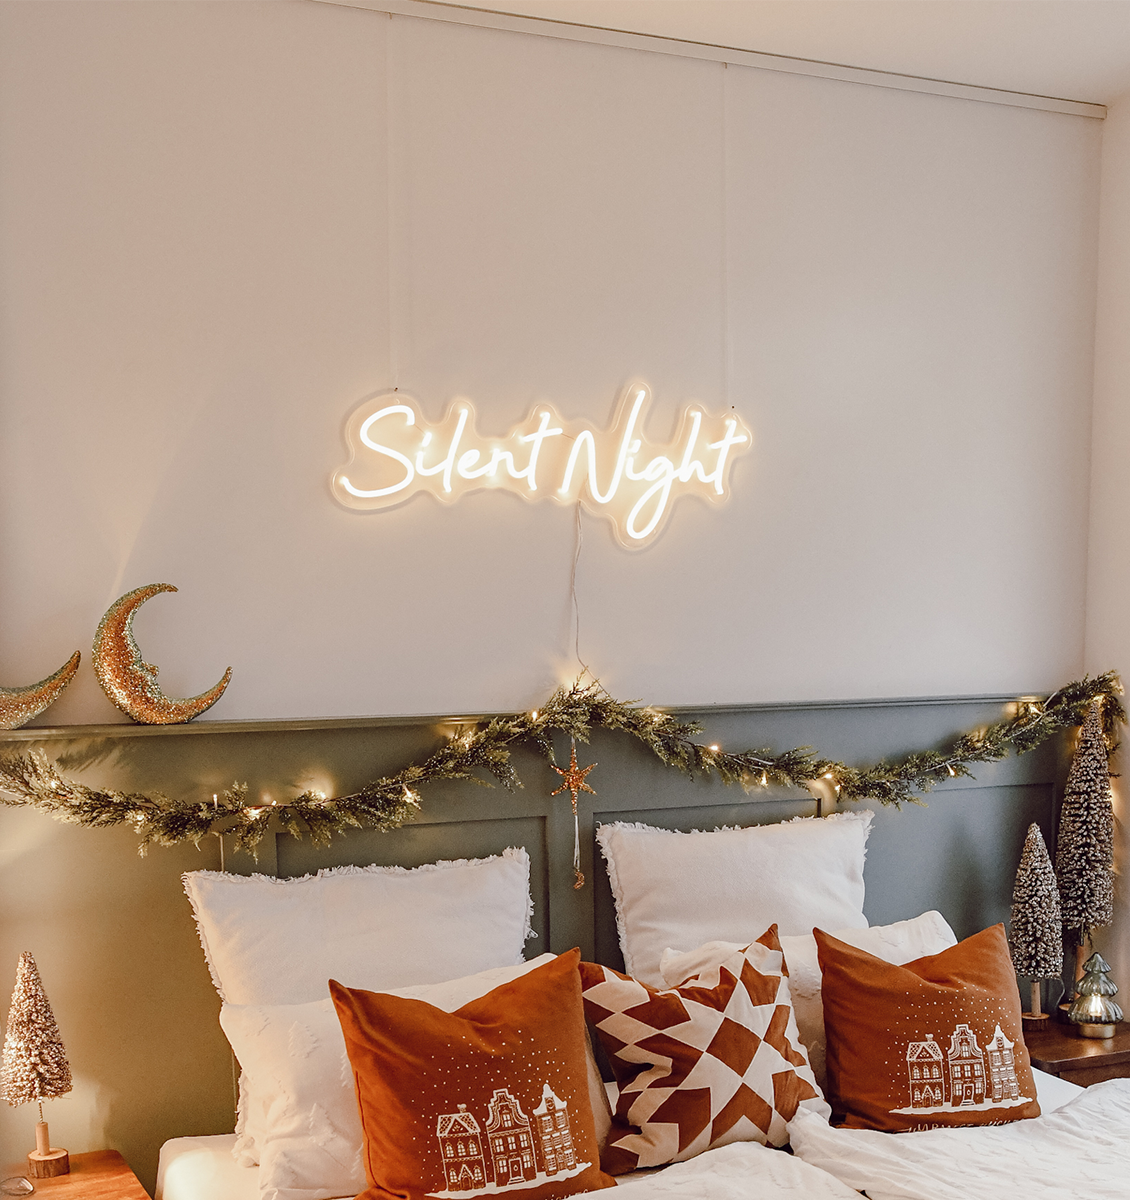 EN Led lamp Christmas decoration on wall in bedroom